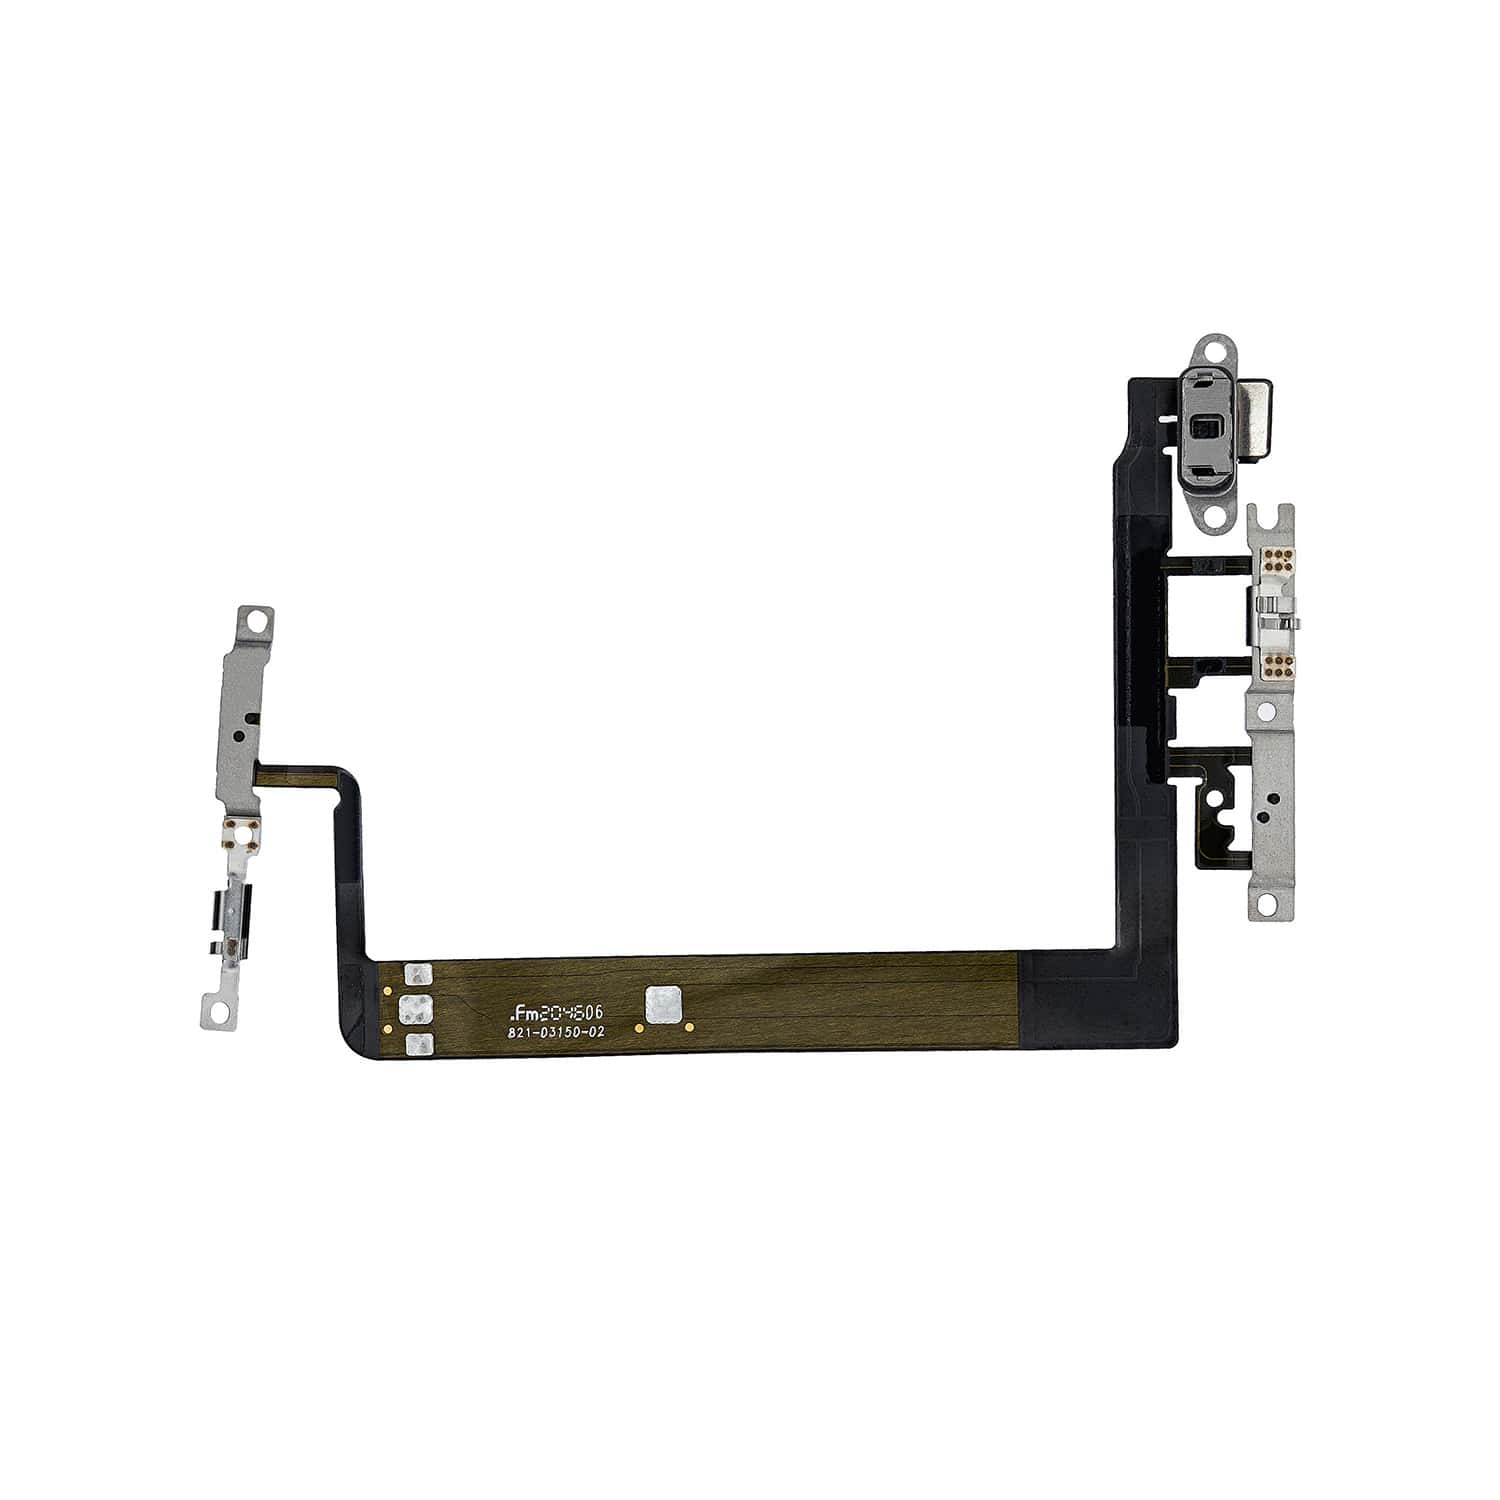 POWER BUTTON WITH METAL BRACKET ASSEMBLY FOR IPHONE 13